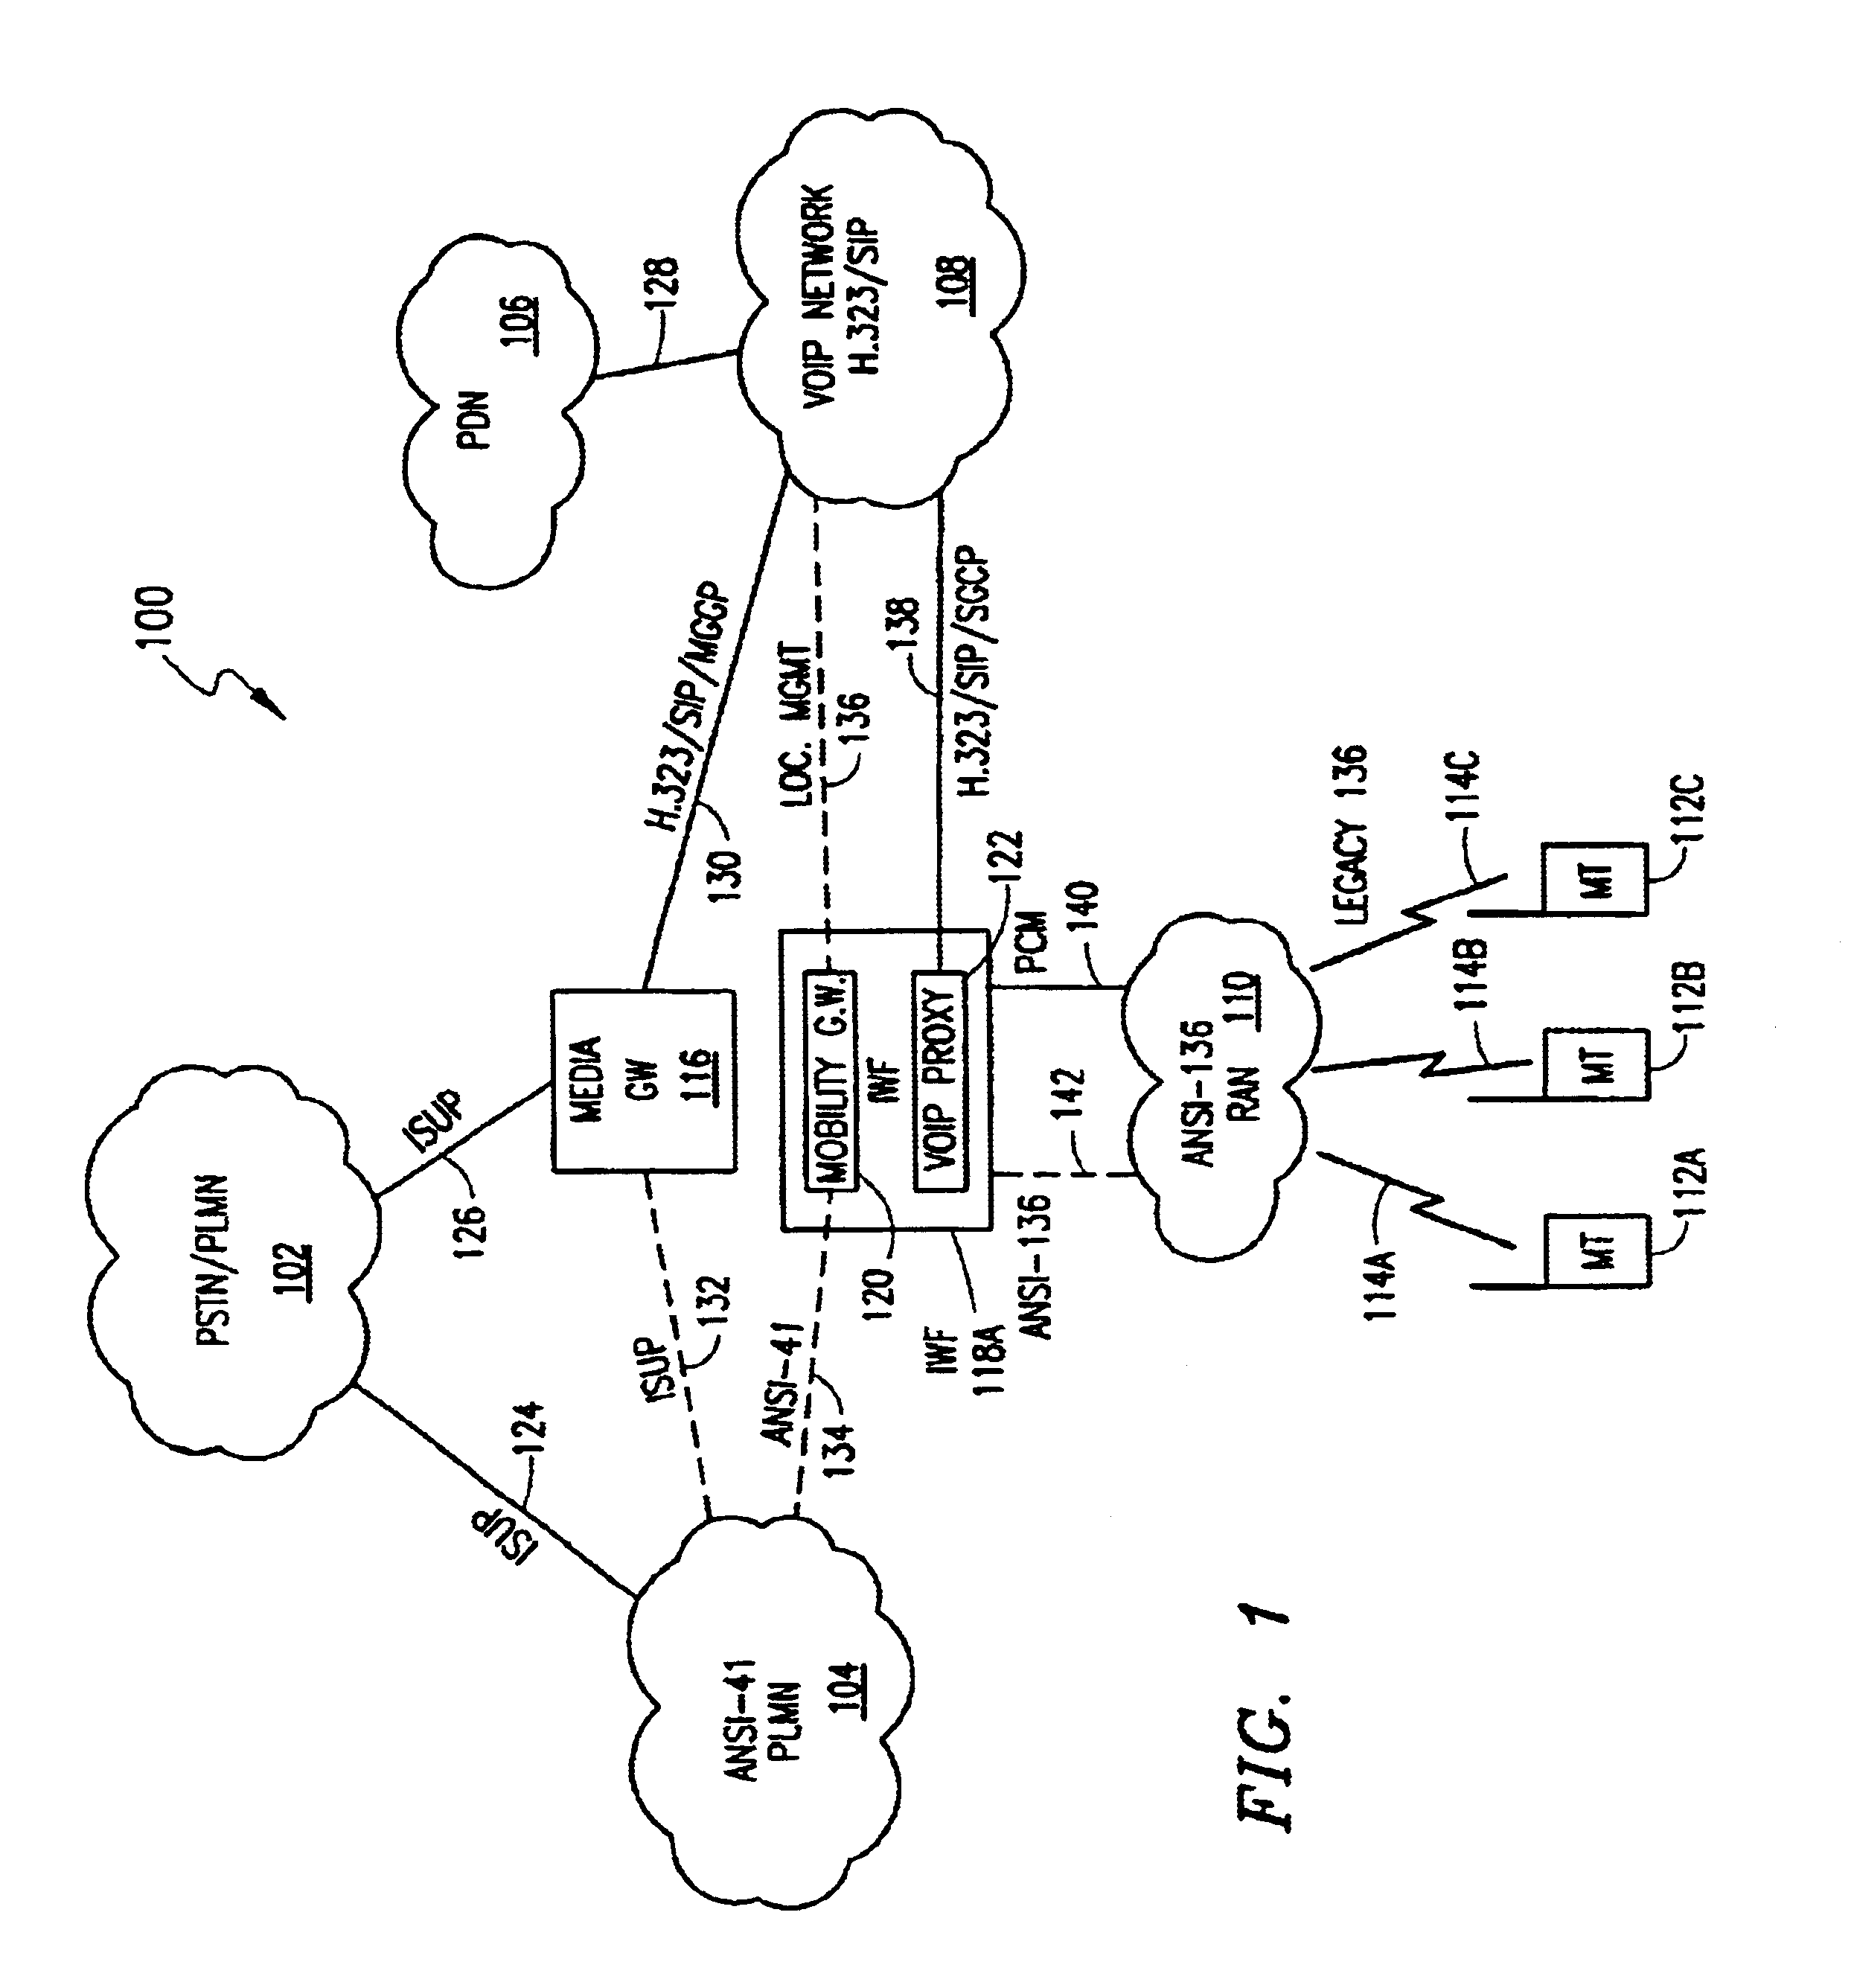 System and method for providing wireless telephony over a packet-switched network